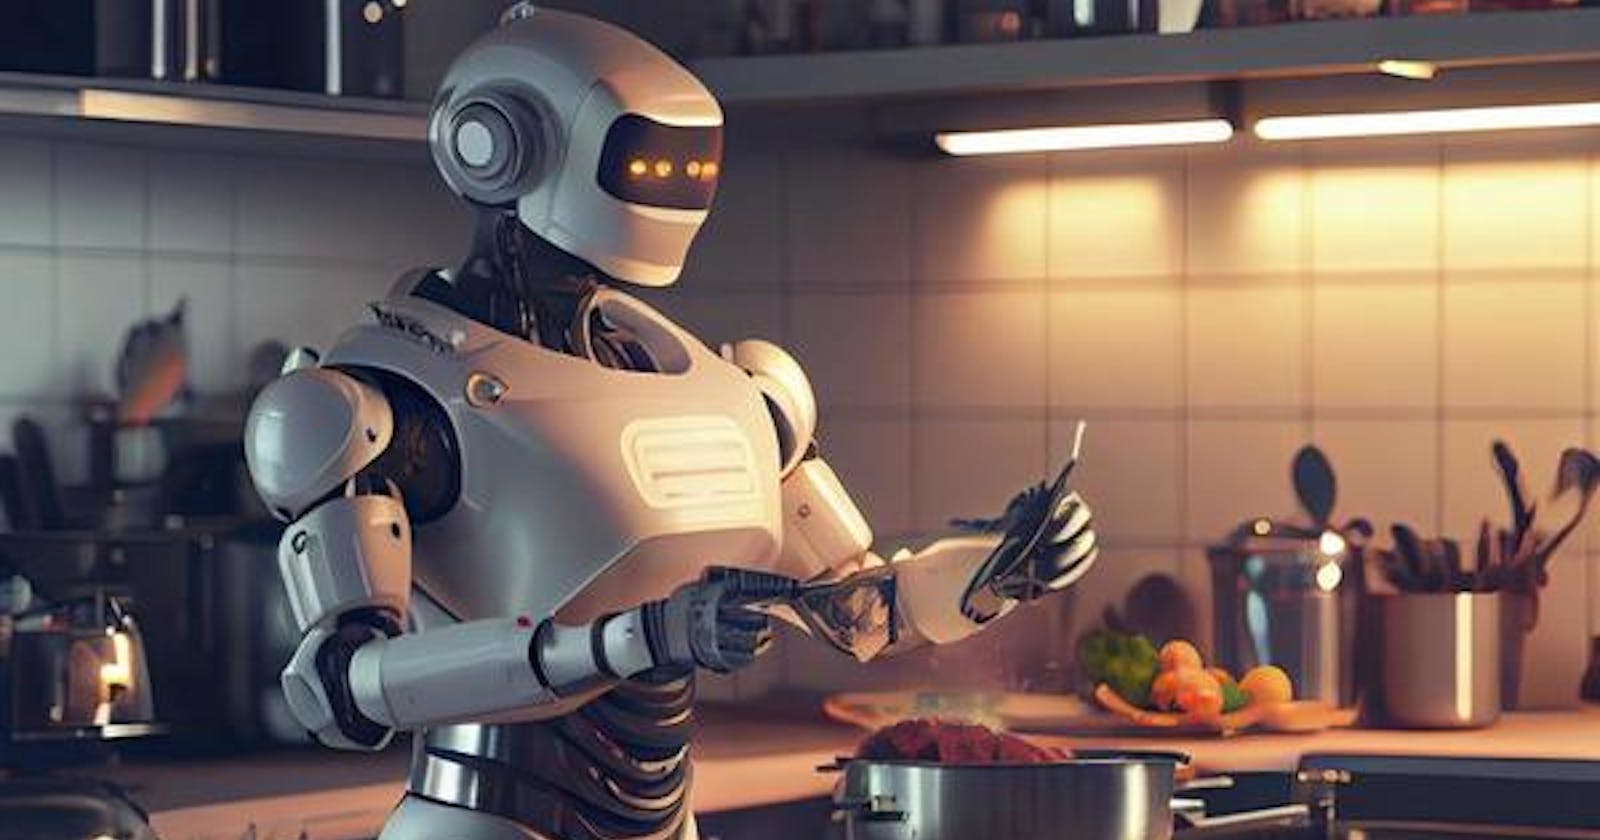 Robot Chefs That Cook by Watching Cooking Videos